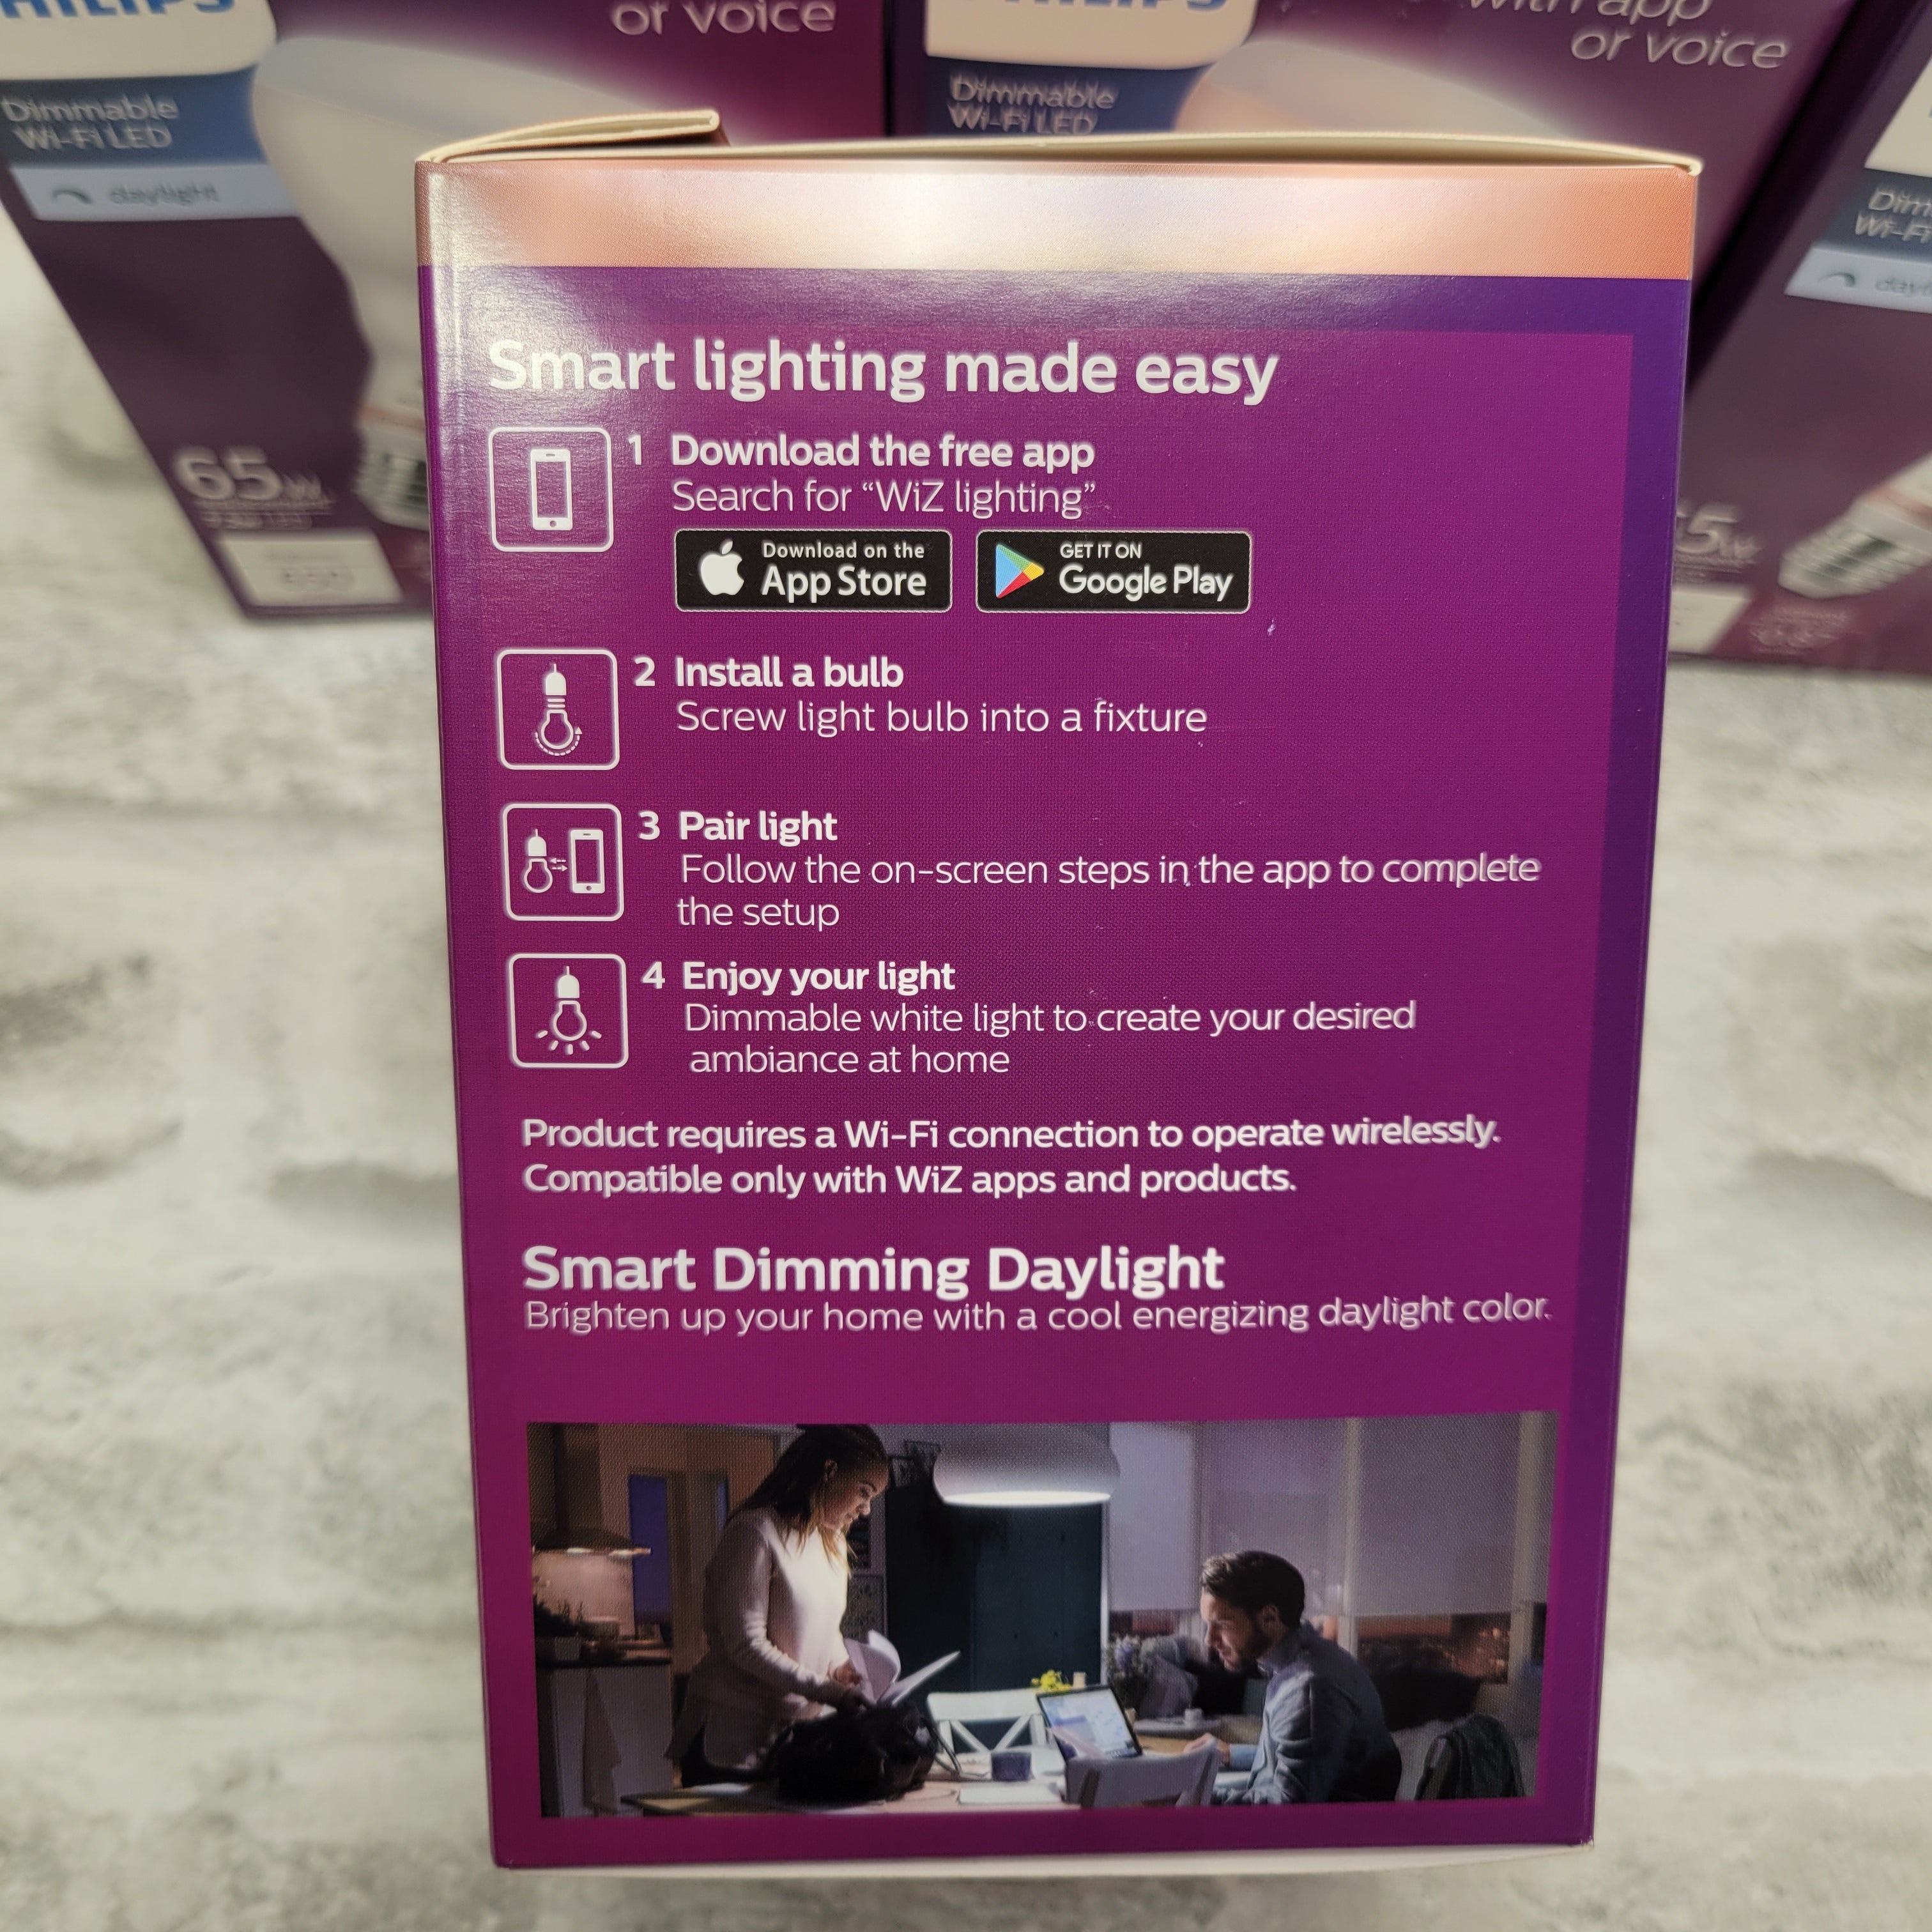 (Lot of 4) Philips Daylight BR30 LED 65-W Dimmable Smart Wi-Fi Light Bulb (7585705623790)